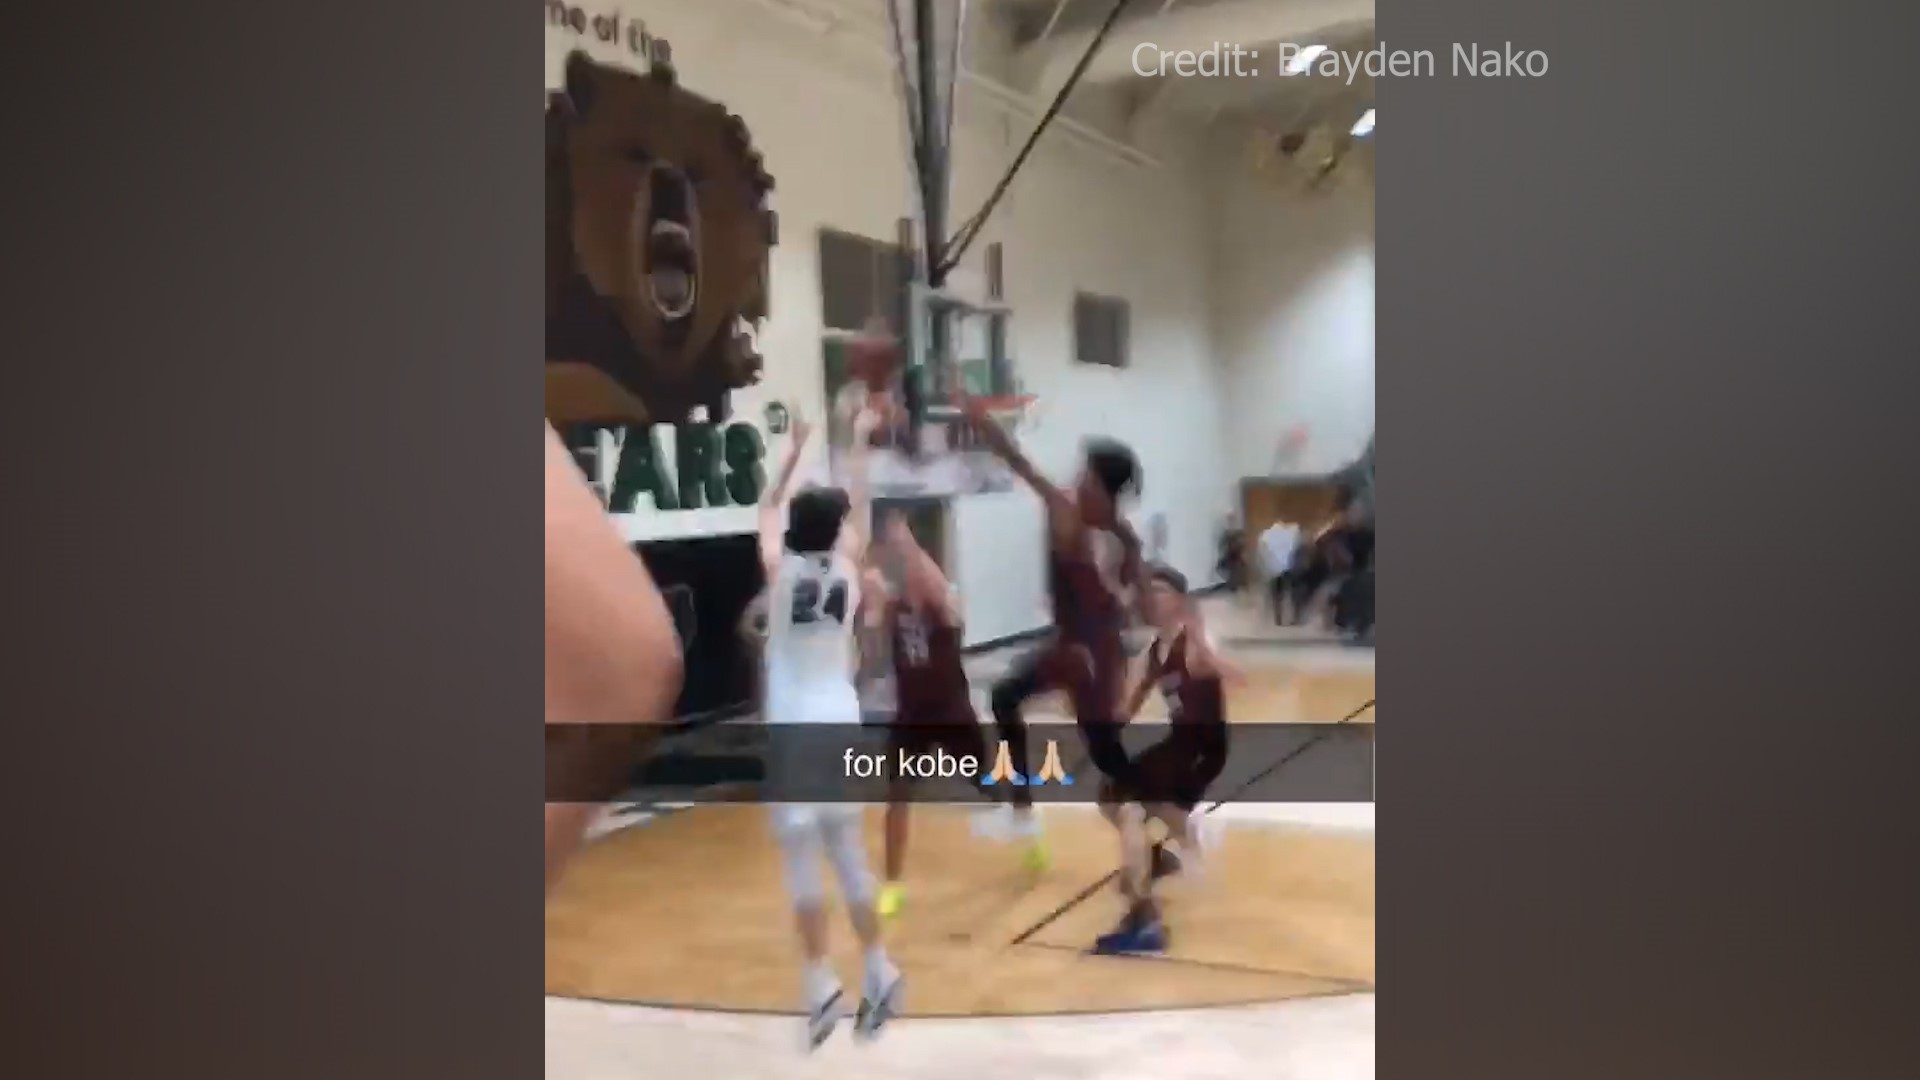 At a varsity high school basketball game in Arizona a high schooler sank the game-winning shot at the buzzer. On top of that, he was wearing No. 24, Kobe’s number.